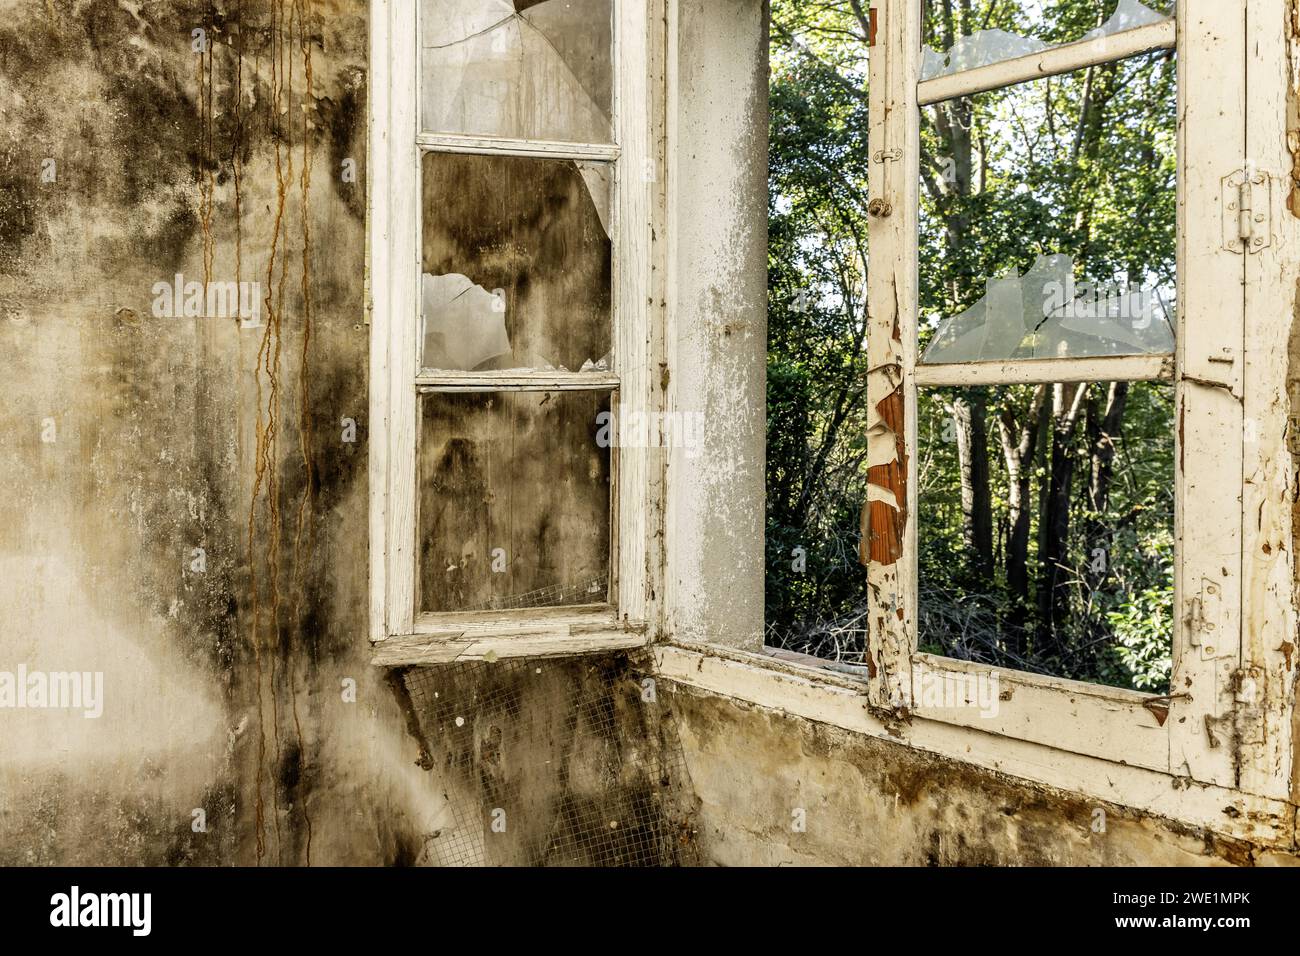 Interior of a dirty and dilapidated room in an abandoned house with broken glass windows Stock Photo